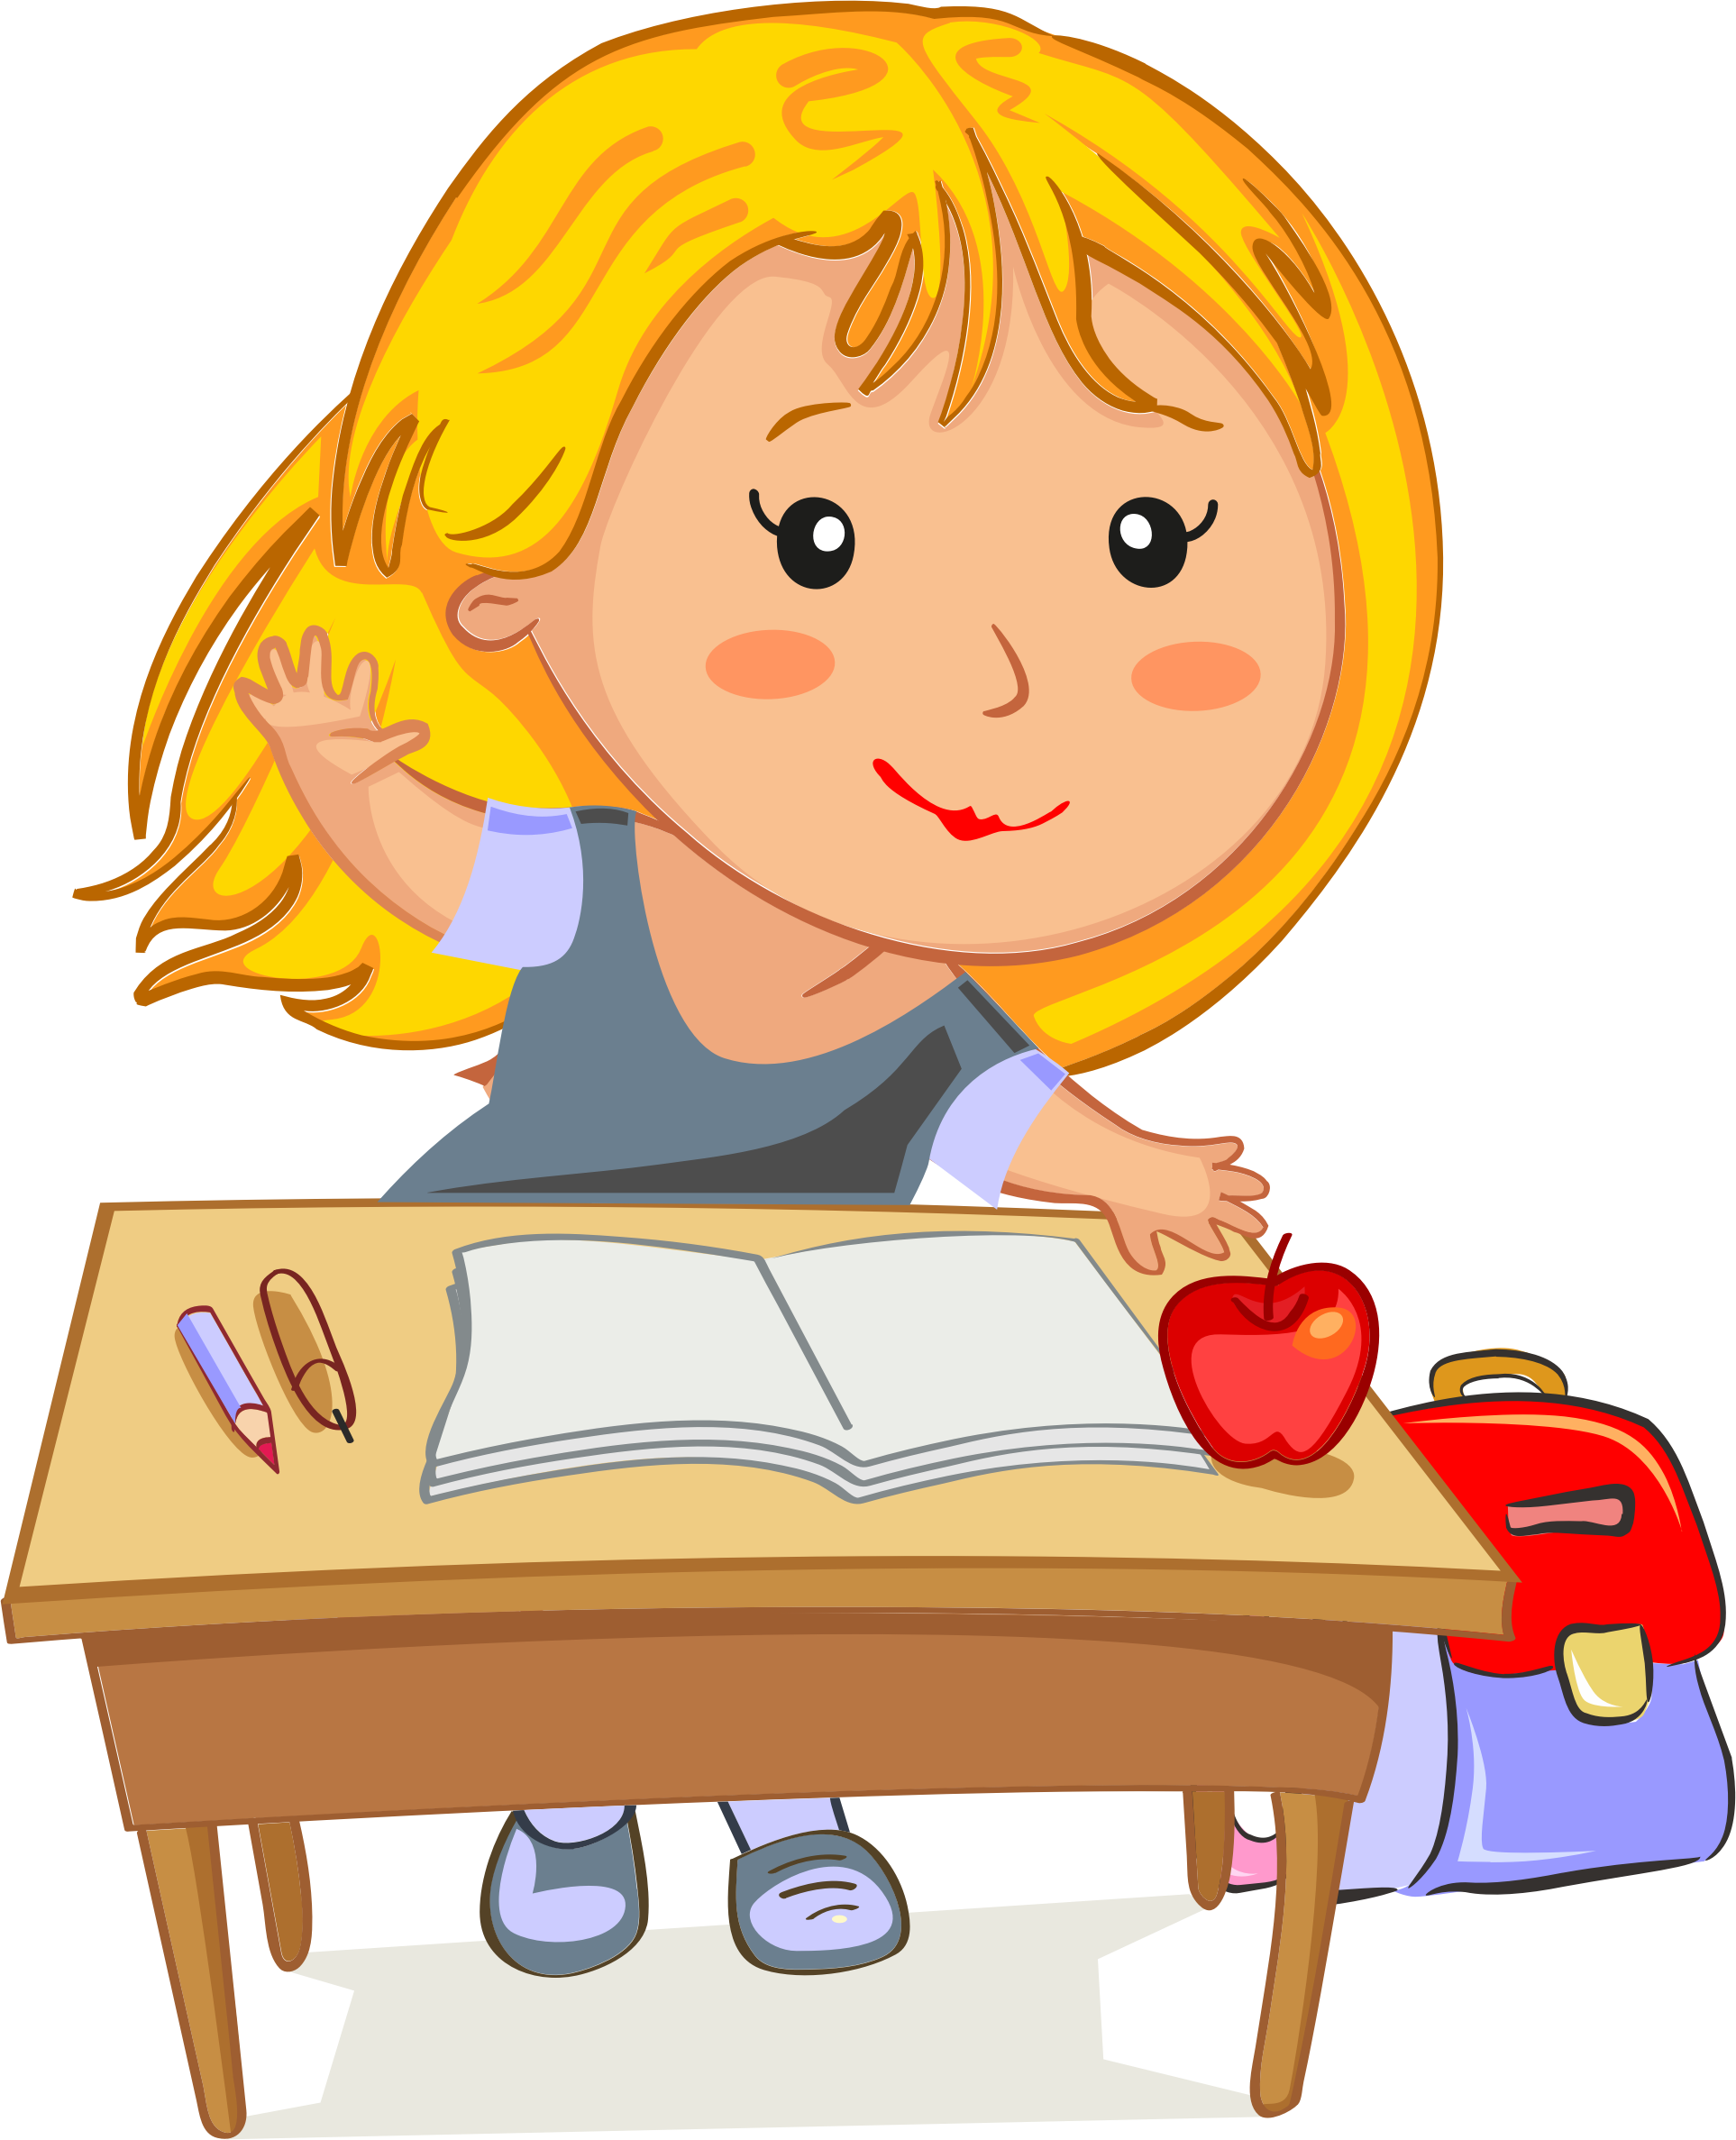 Student working cliparts and. Clipart desk cartoon school